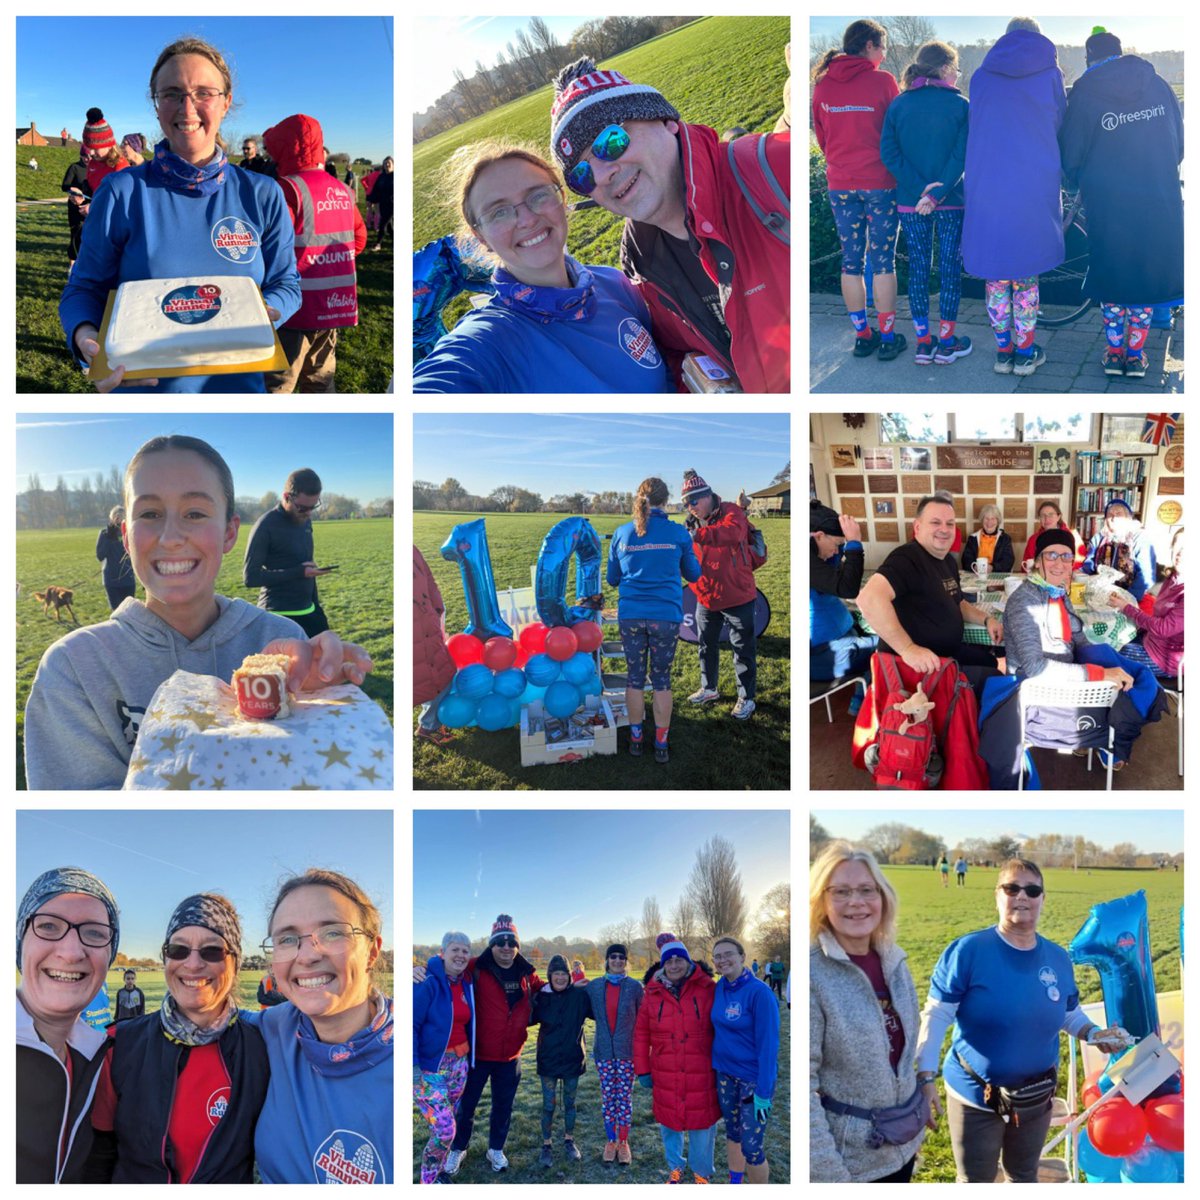 I’m not often speechless but what a celebration it was today at @beestonparkrun to celebrate 10 years of VR. So many highlights but the biggest has to be Chris joining us all the way from Canada. Thank you for being the best community ever!